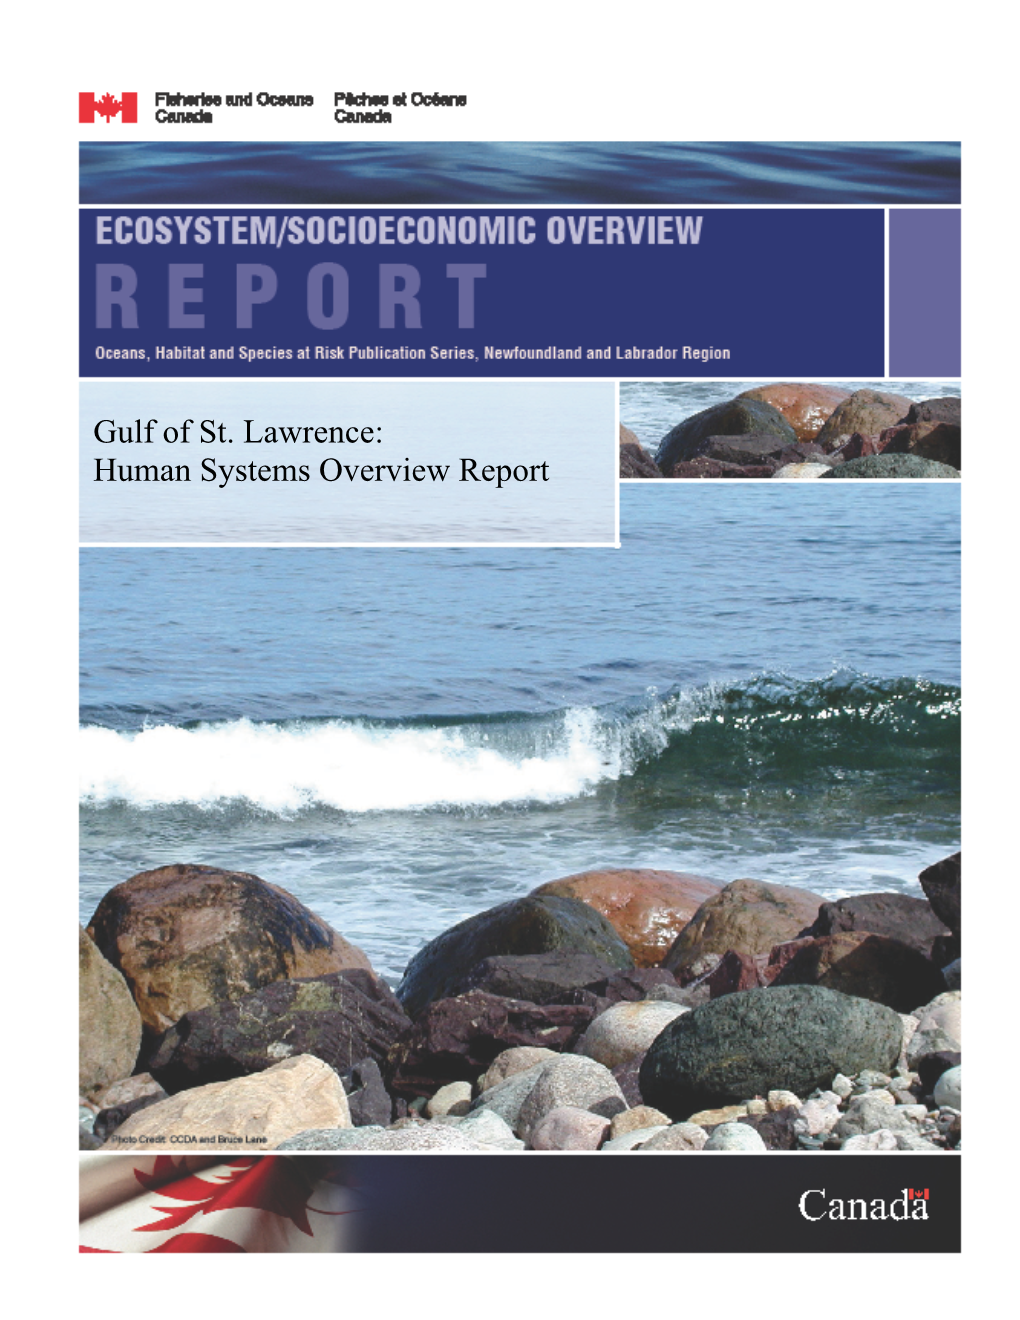 Human Systems and Socio-Economic Components of the Gulf of St